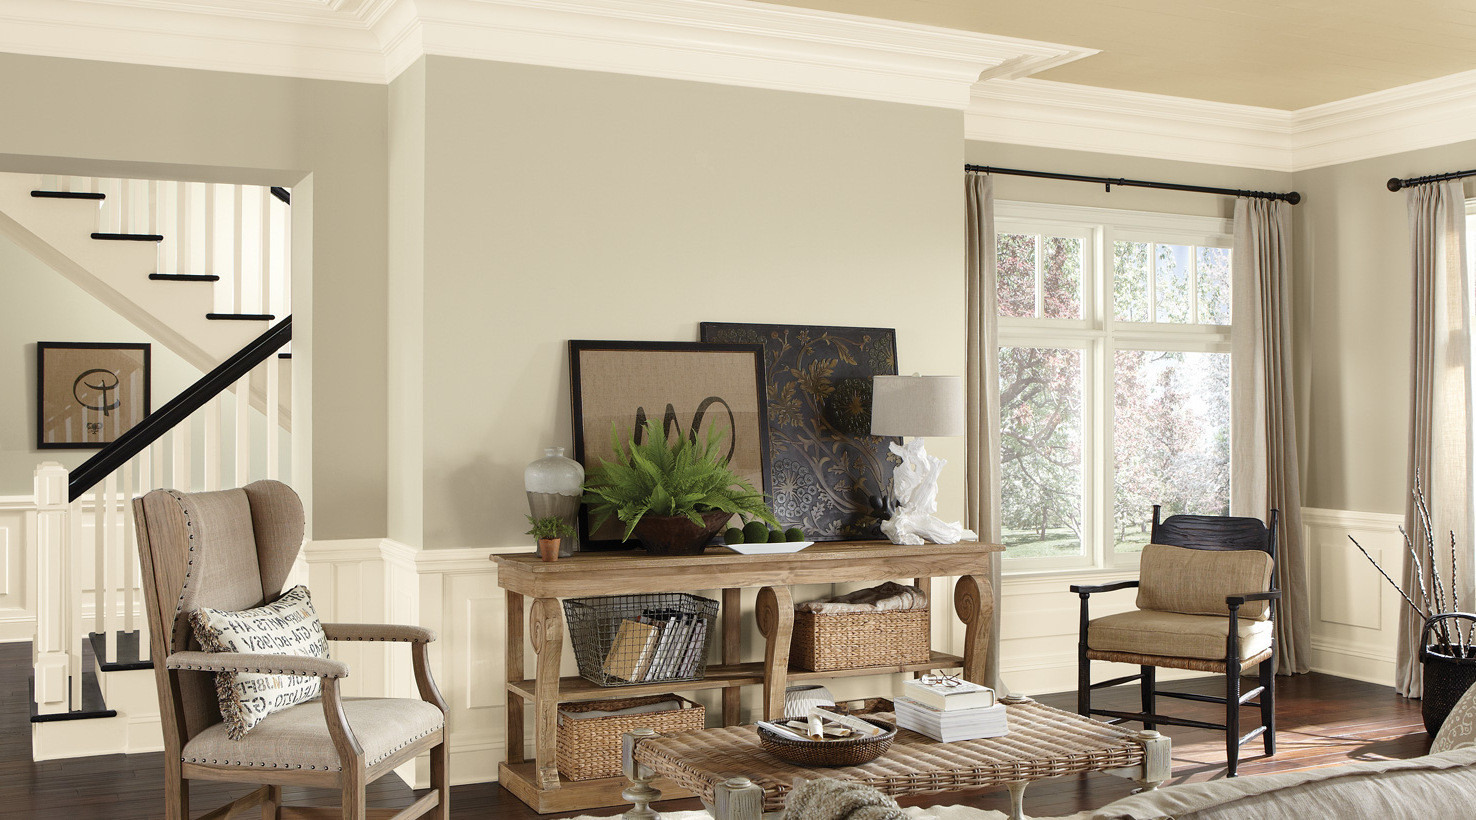 Living Room Paint Color
 Best Paint Color for Living Room Ideas to Decorate Living